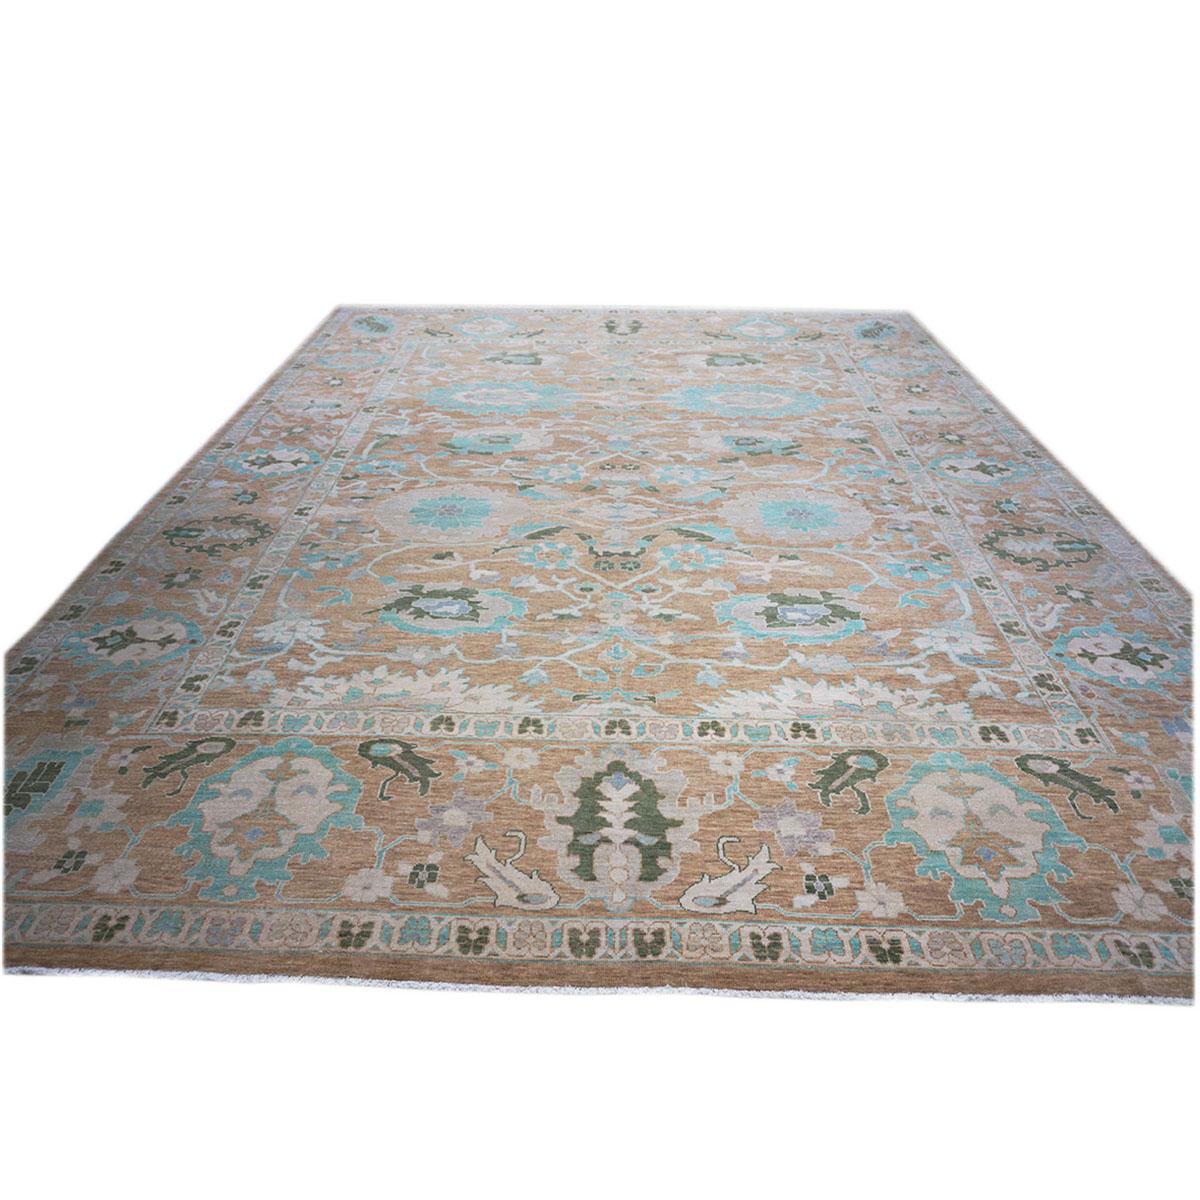 Ashly fine rugs presents an antique recreation of an original Afghani Sultanabad room-sized area rug. Part of our own previous production, this antique recreation was thought of and created in-house and handmade in Afghanistan by our master weavers.